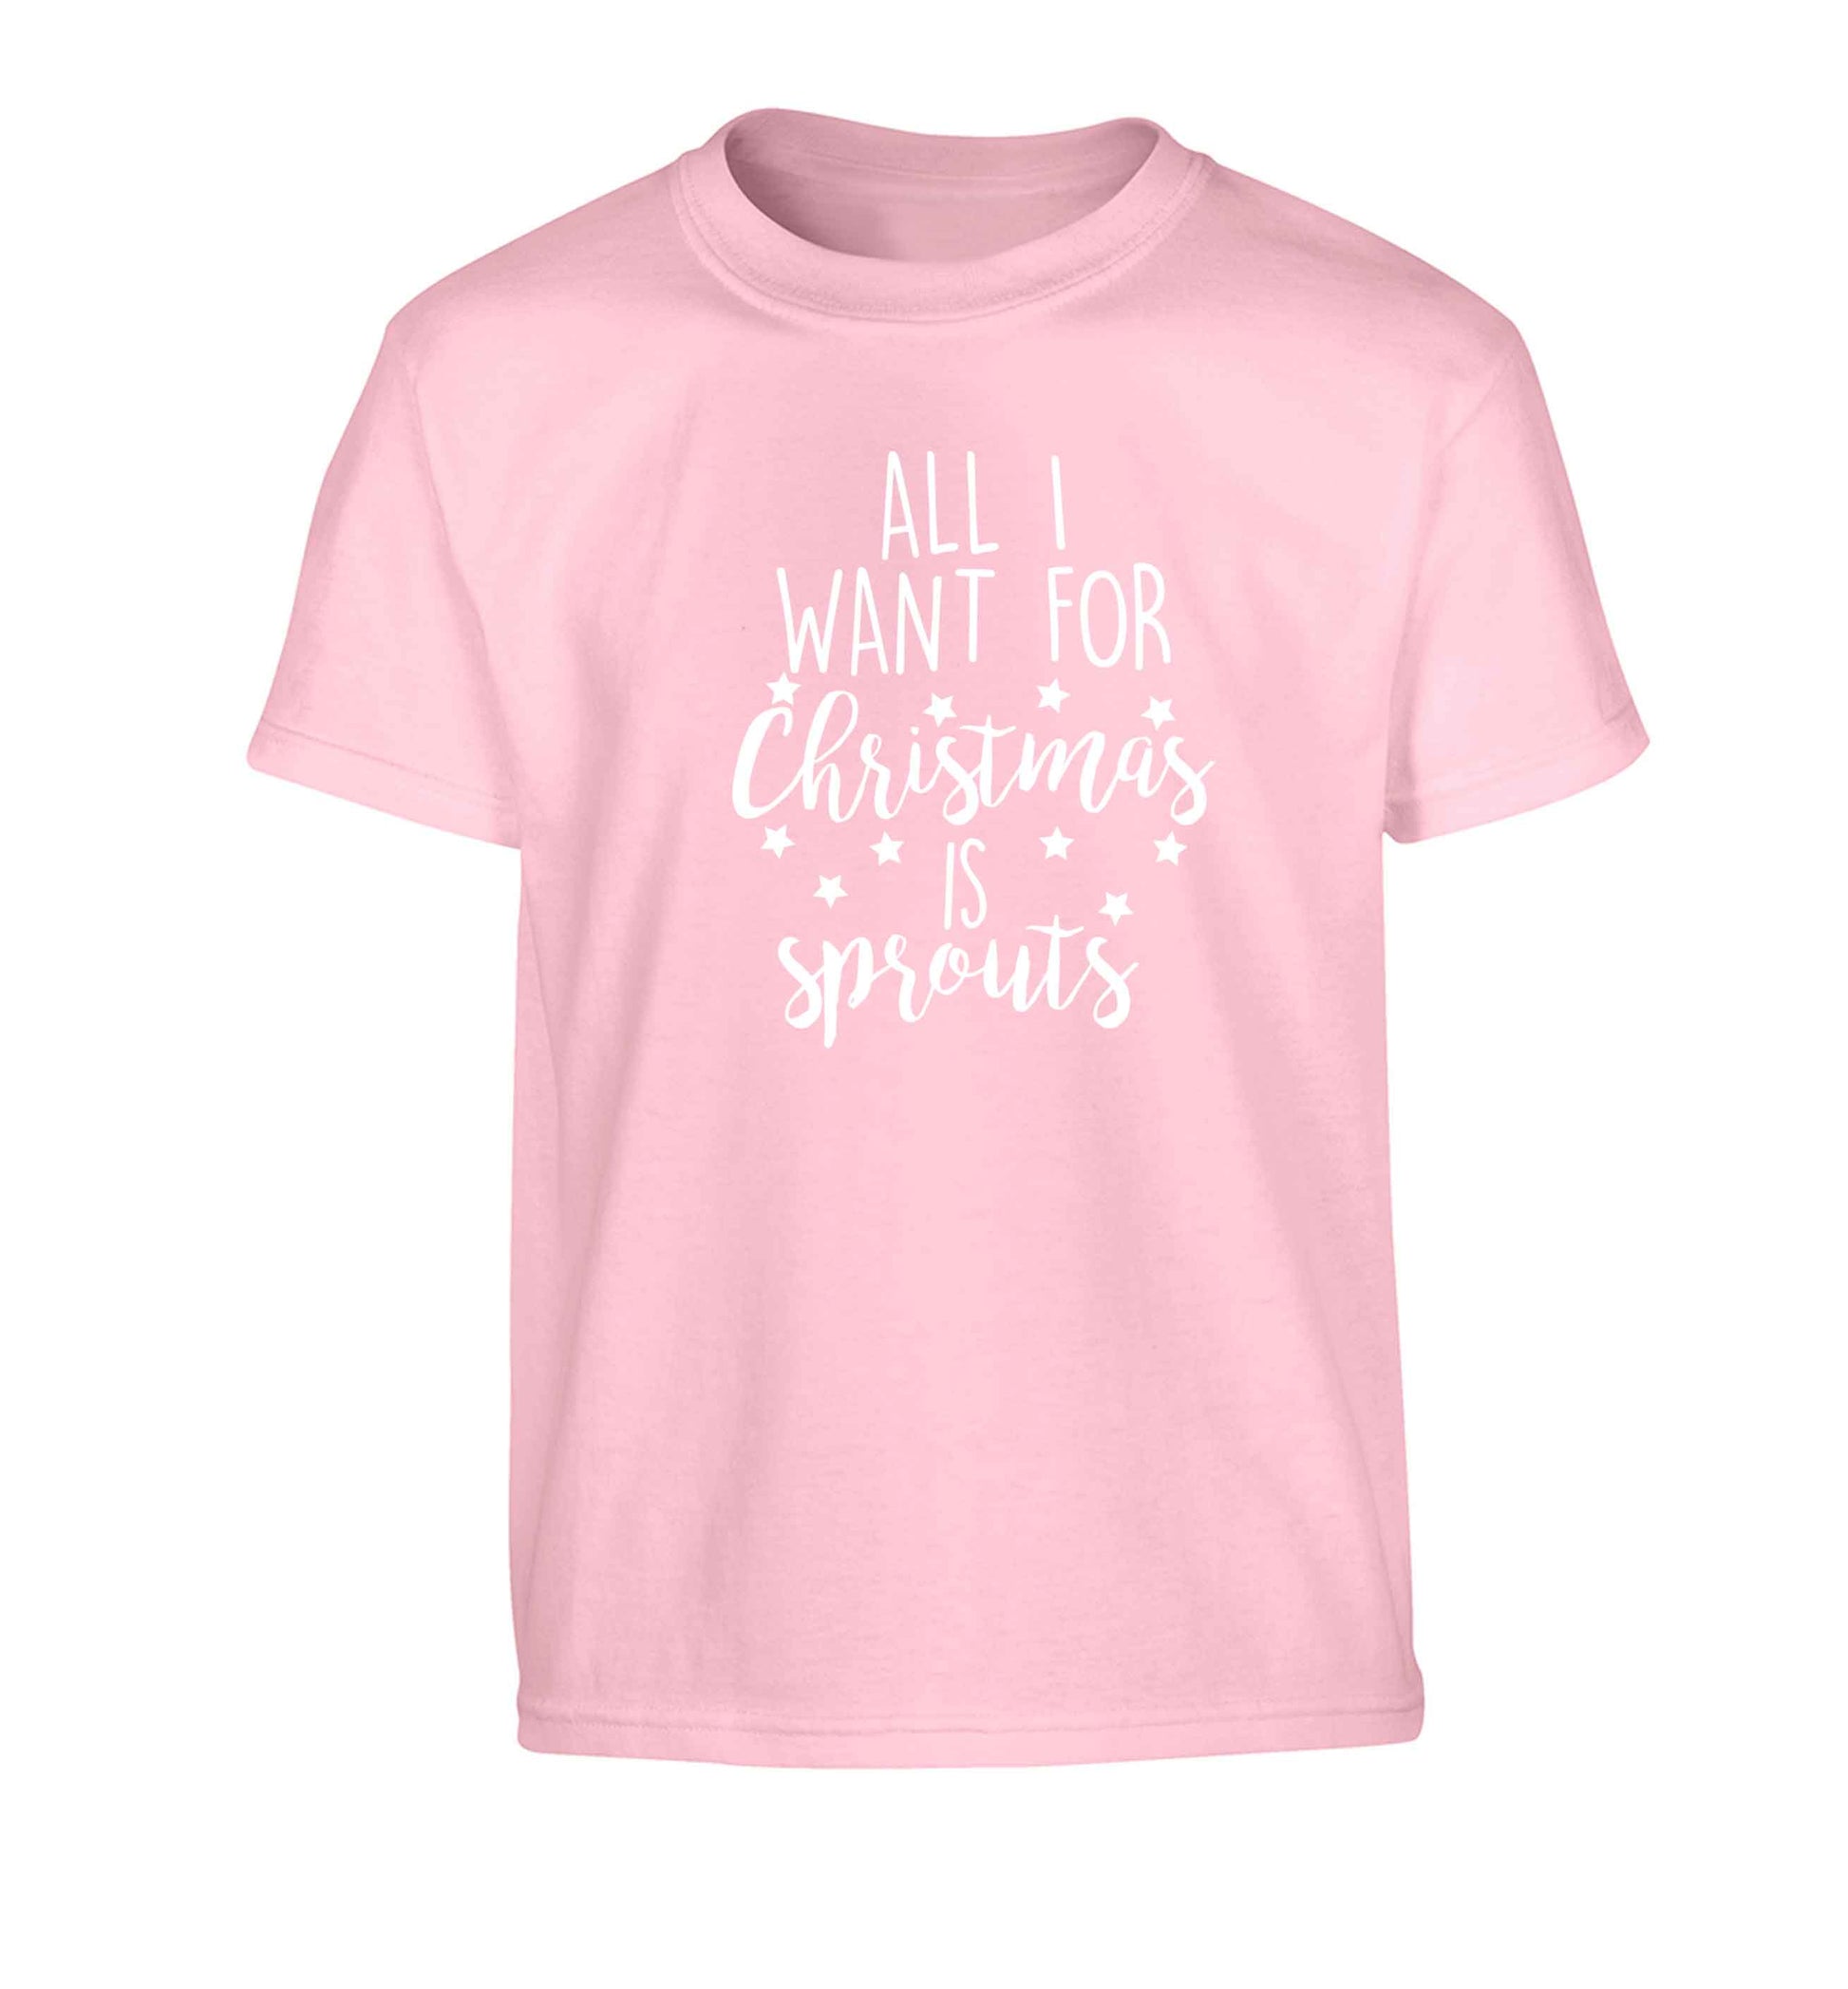 All I want for Christmas is sprouts Children's light pink Tshirt 12-13 Years